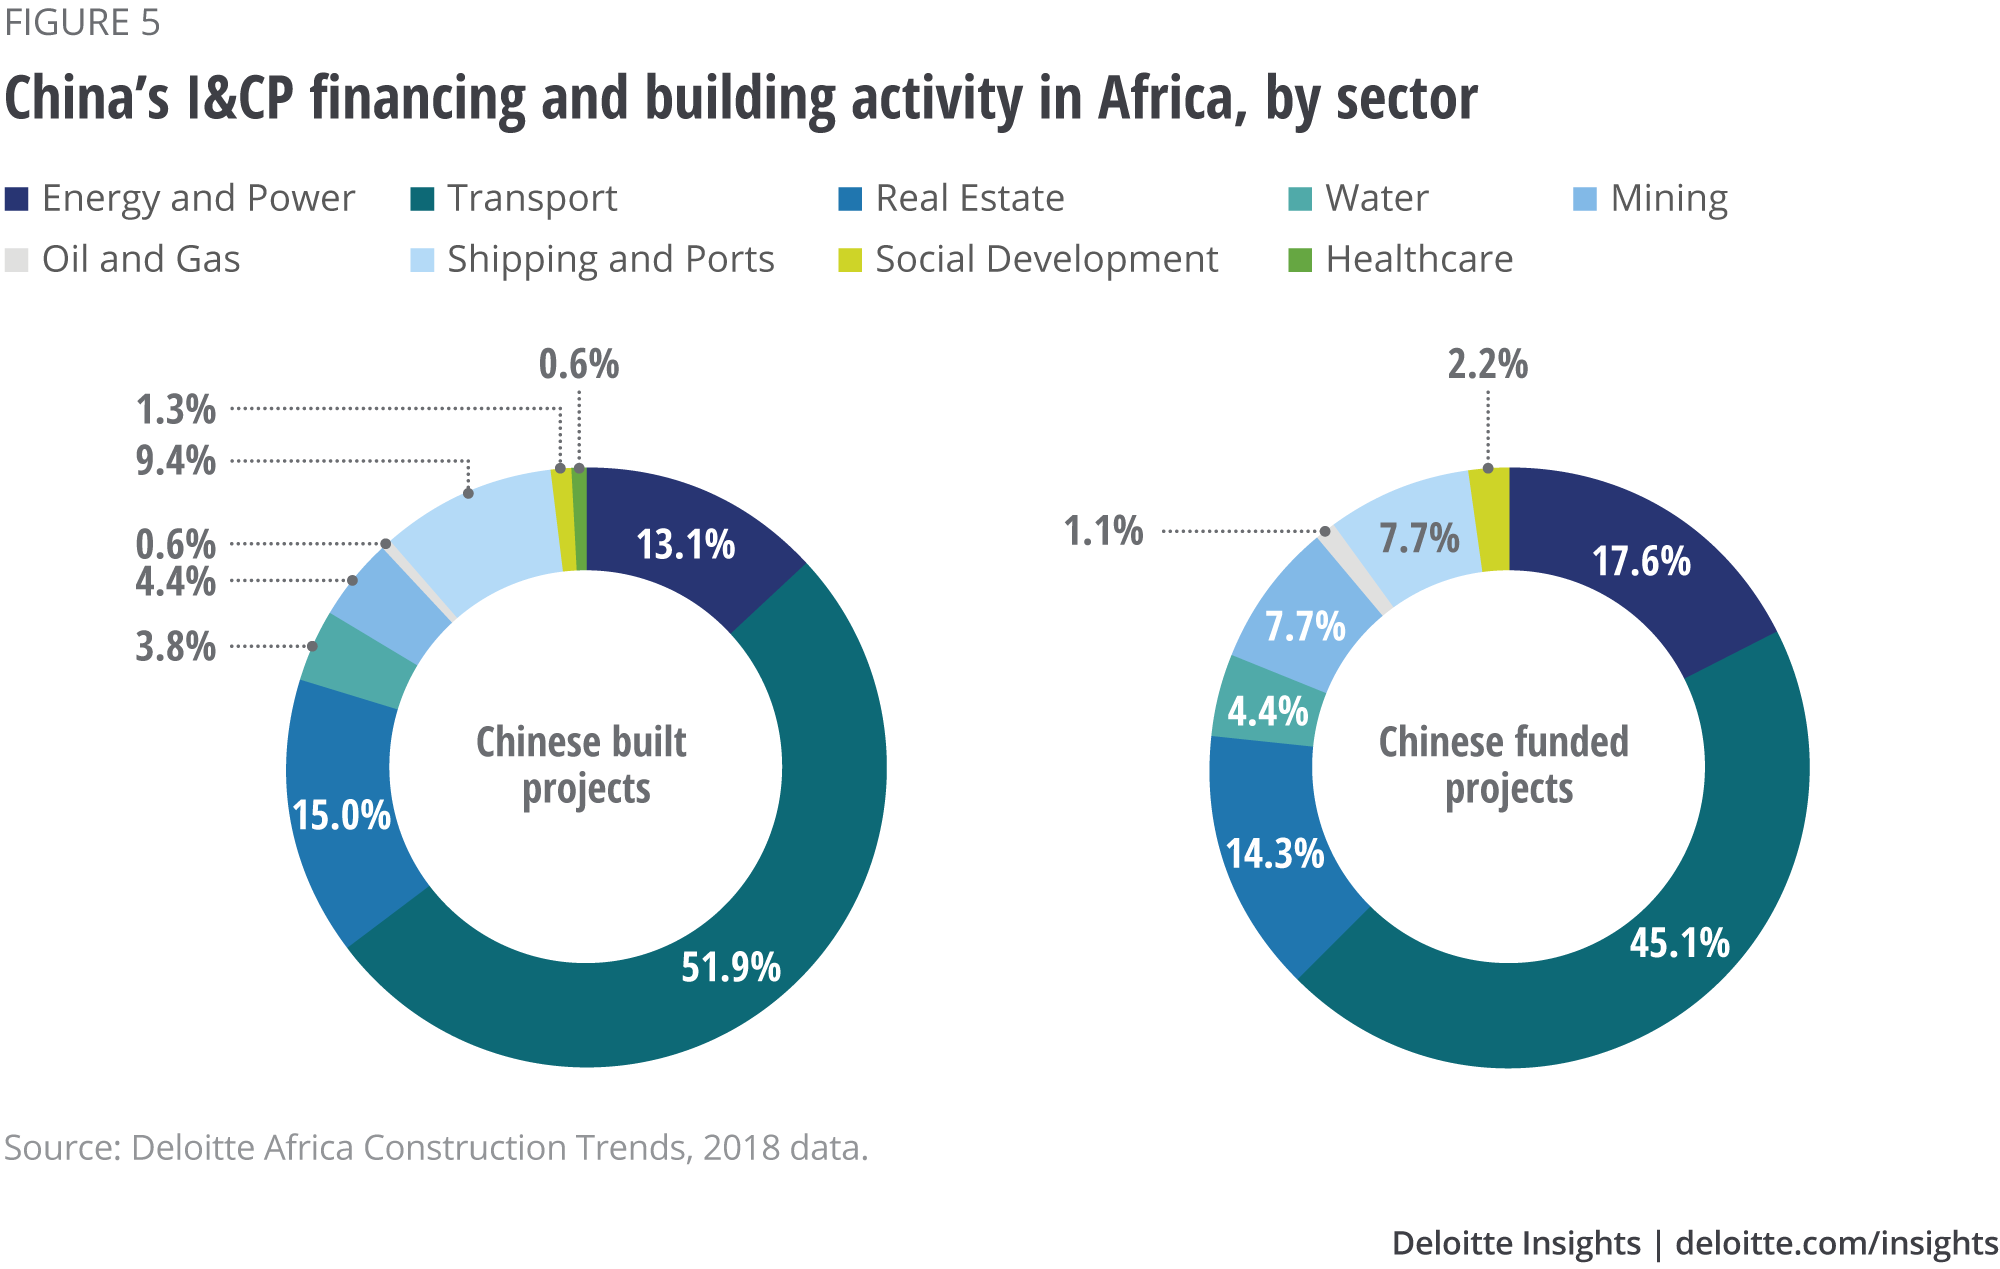 China’s investment in Africa by sector